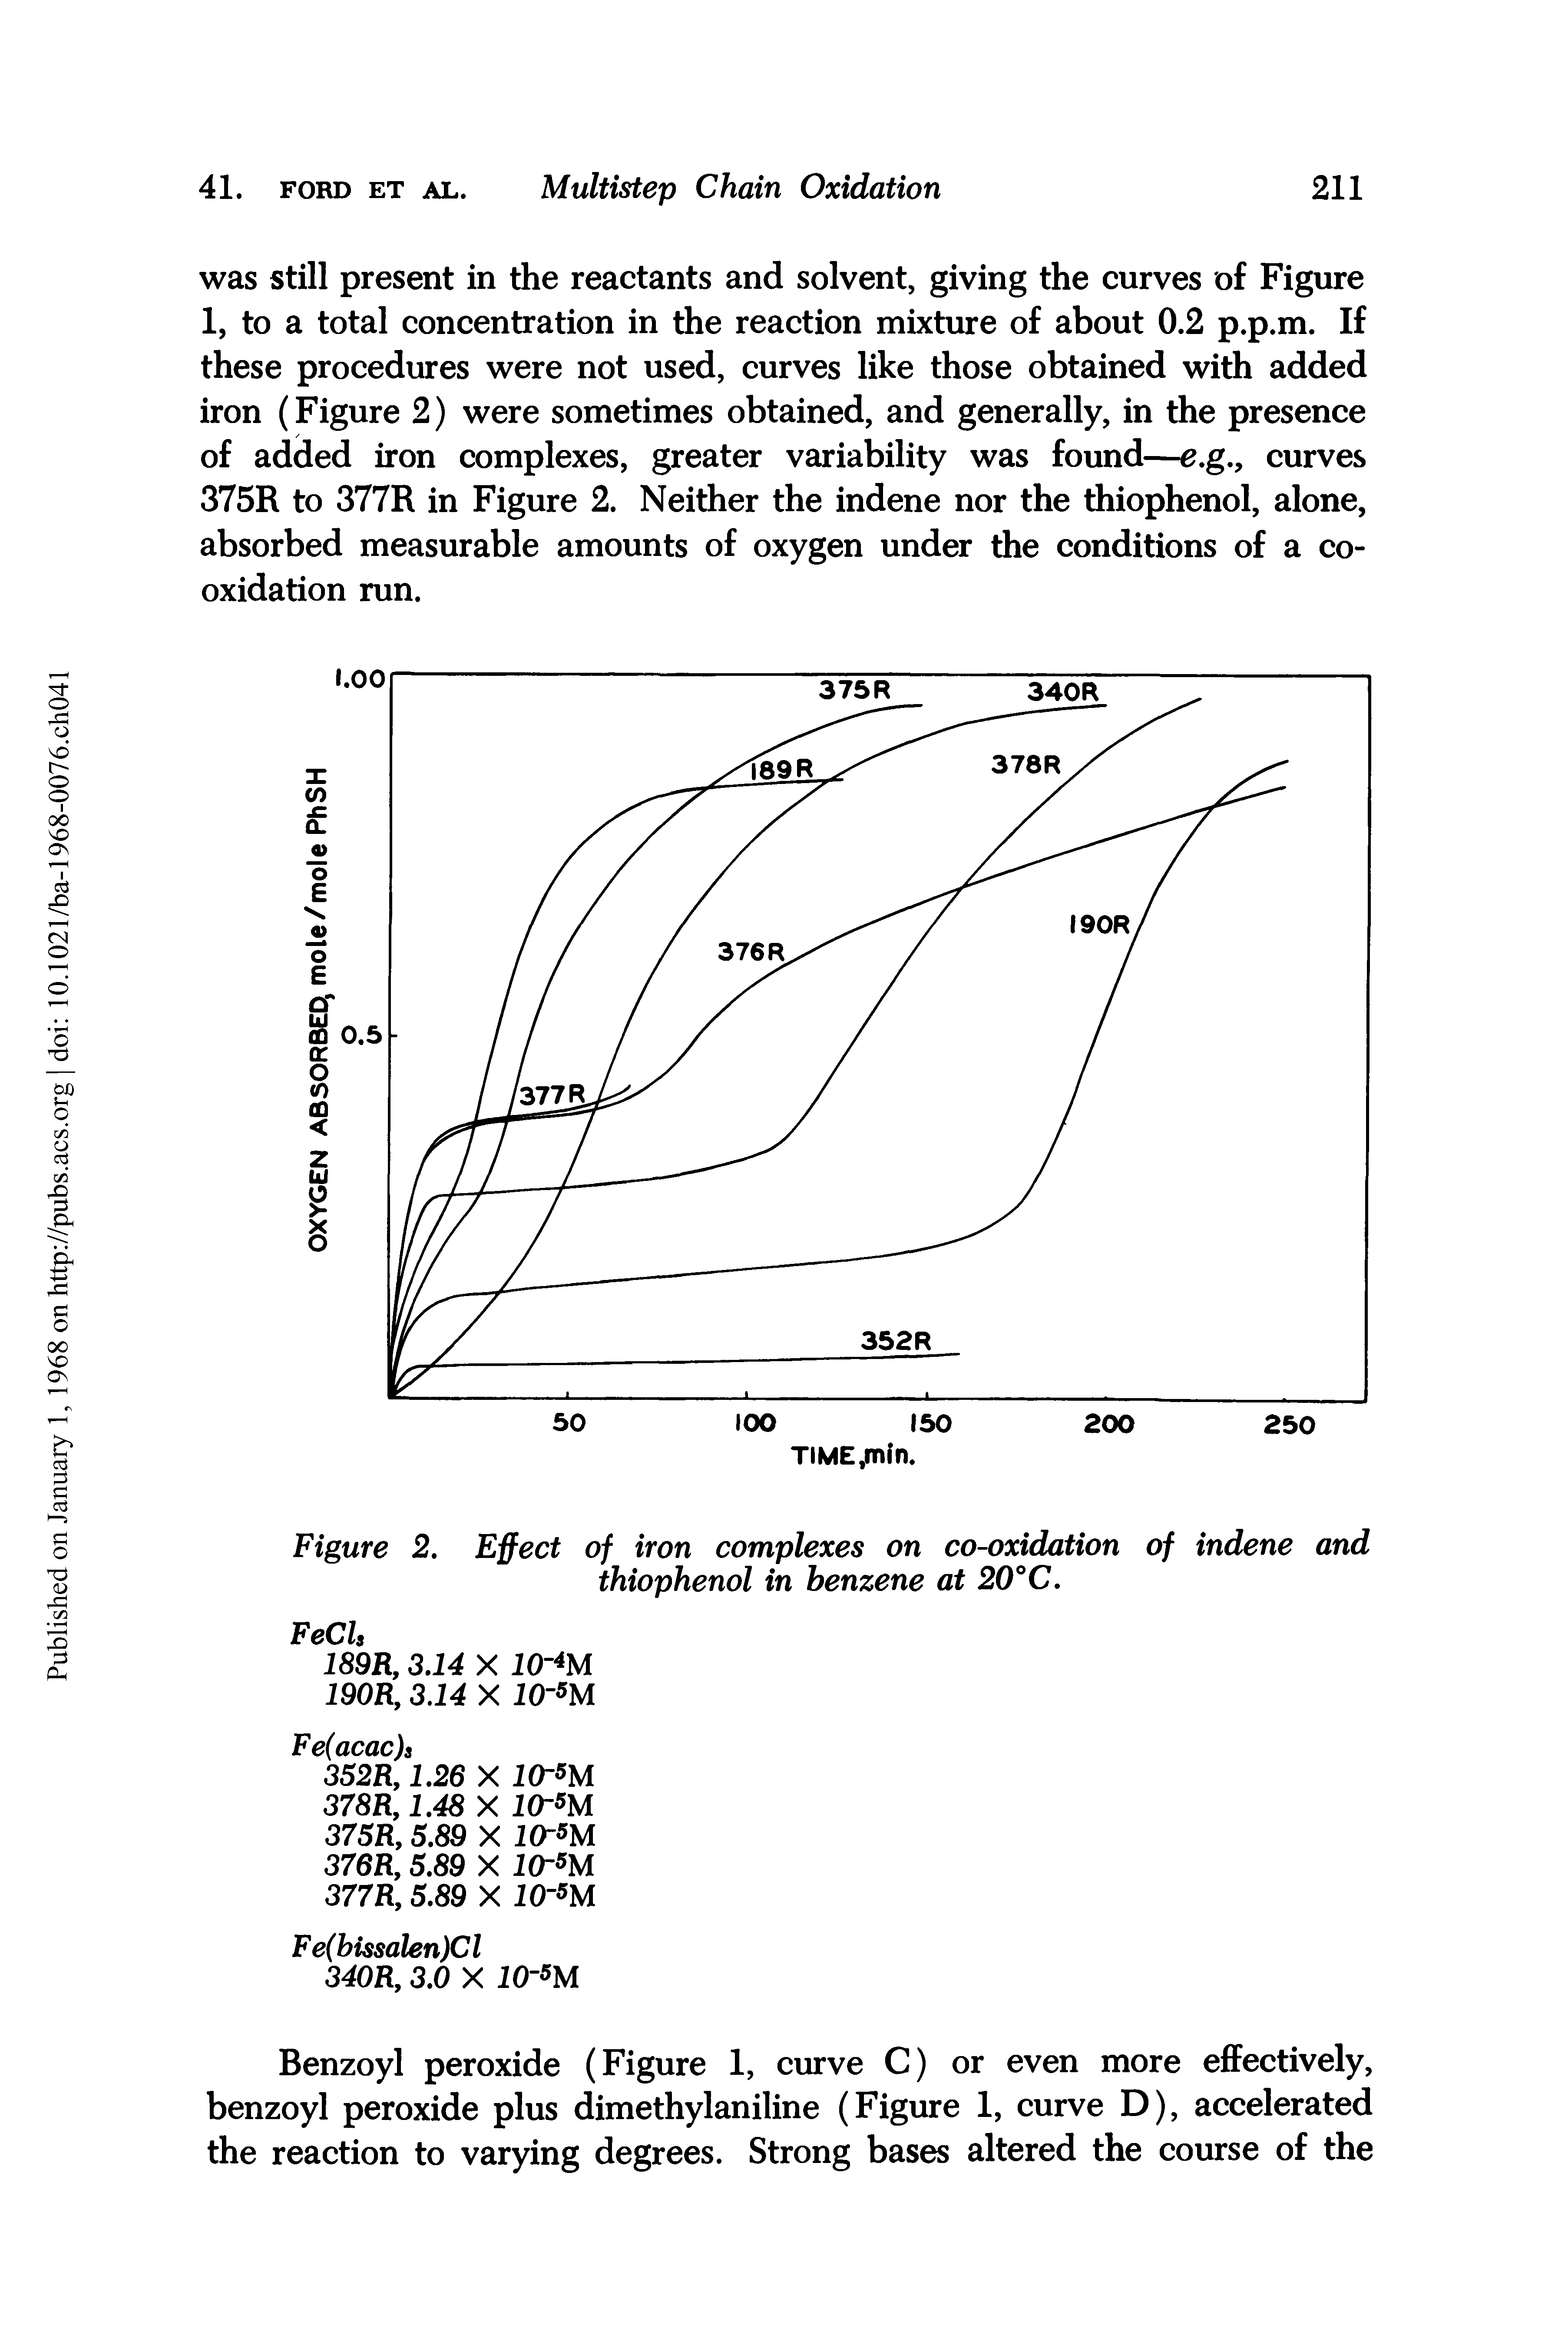 Figure 2. Effect of iron complexes on co-oxidation of indene and thiophenol in benzene at 20°C.